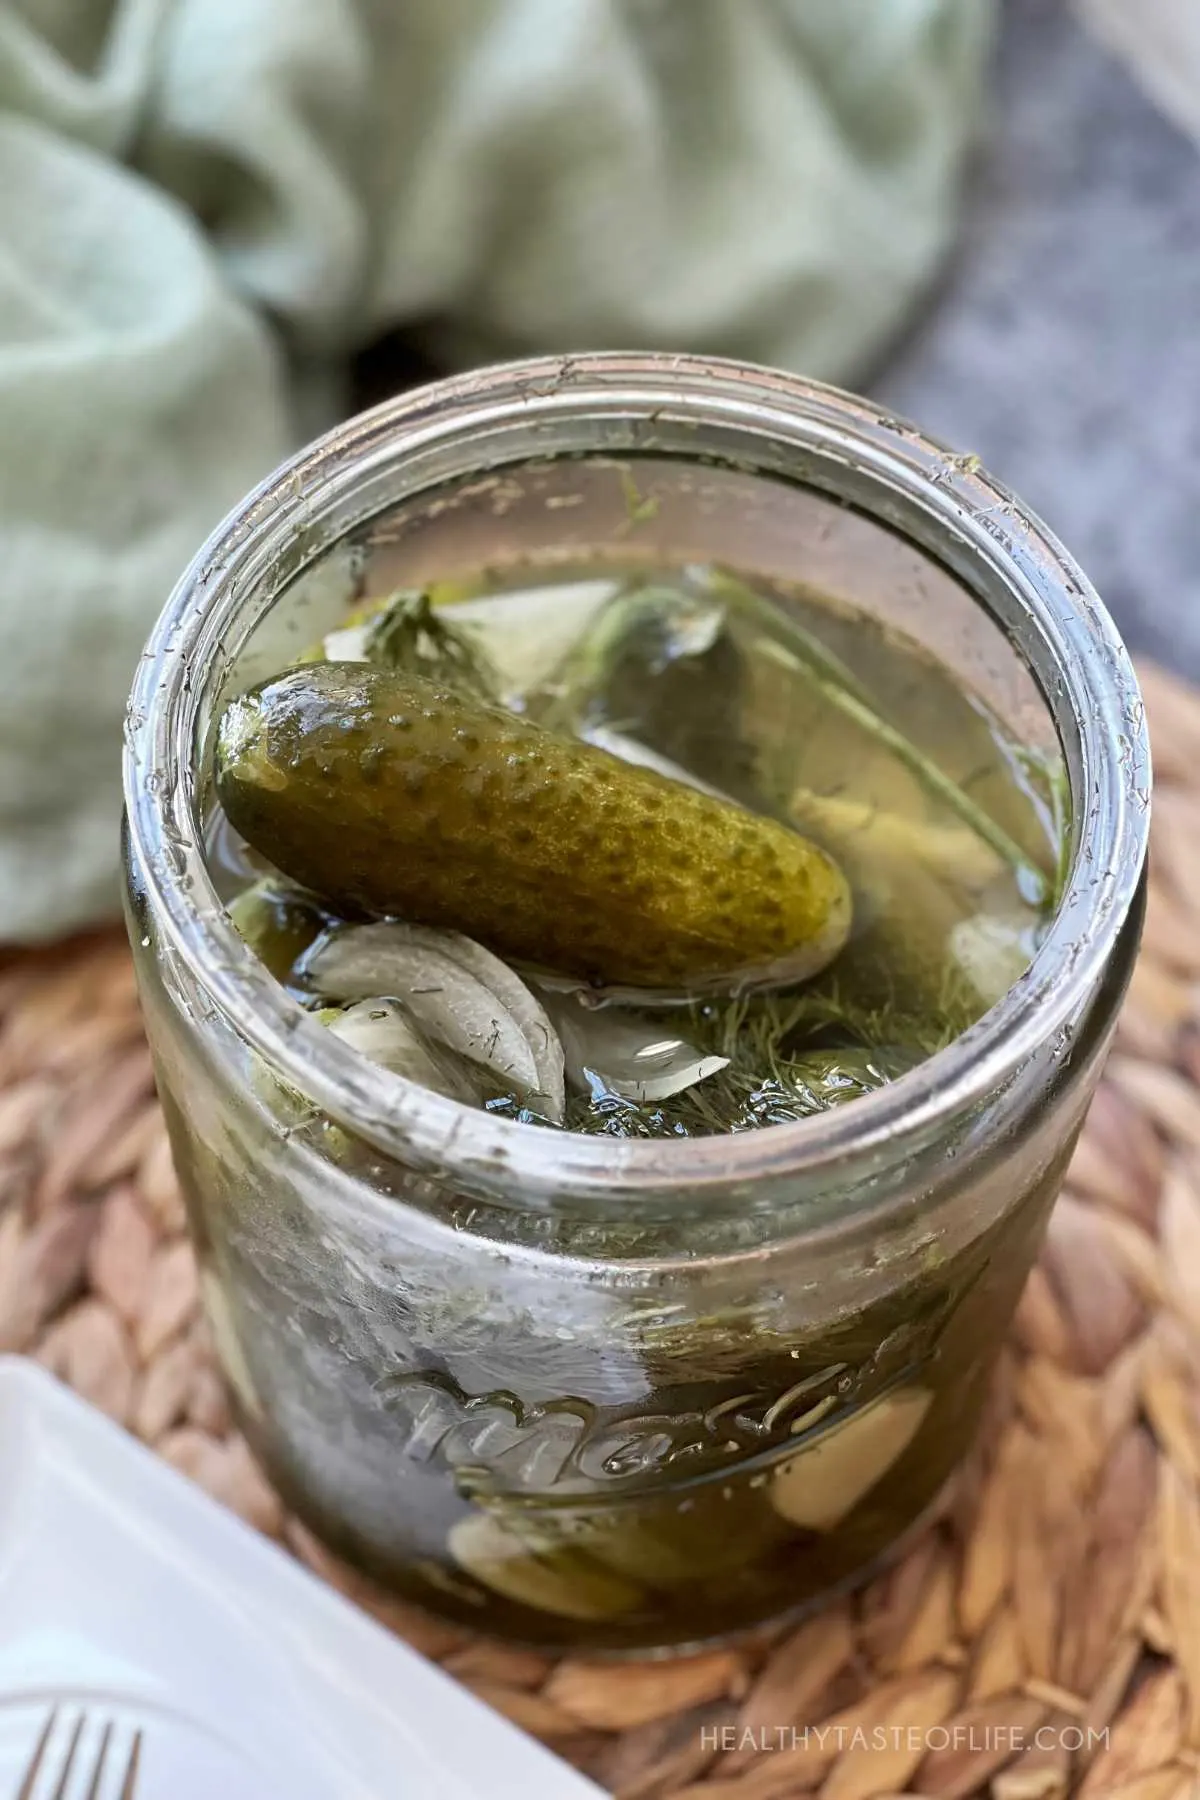 Lacto fermented cucumbers pickled in salt brine without vinegar